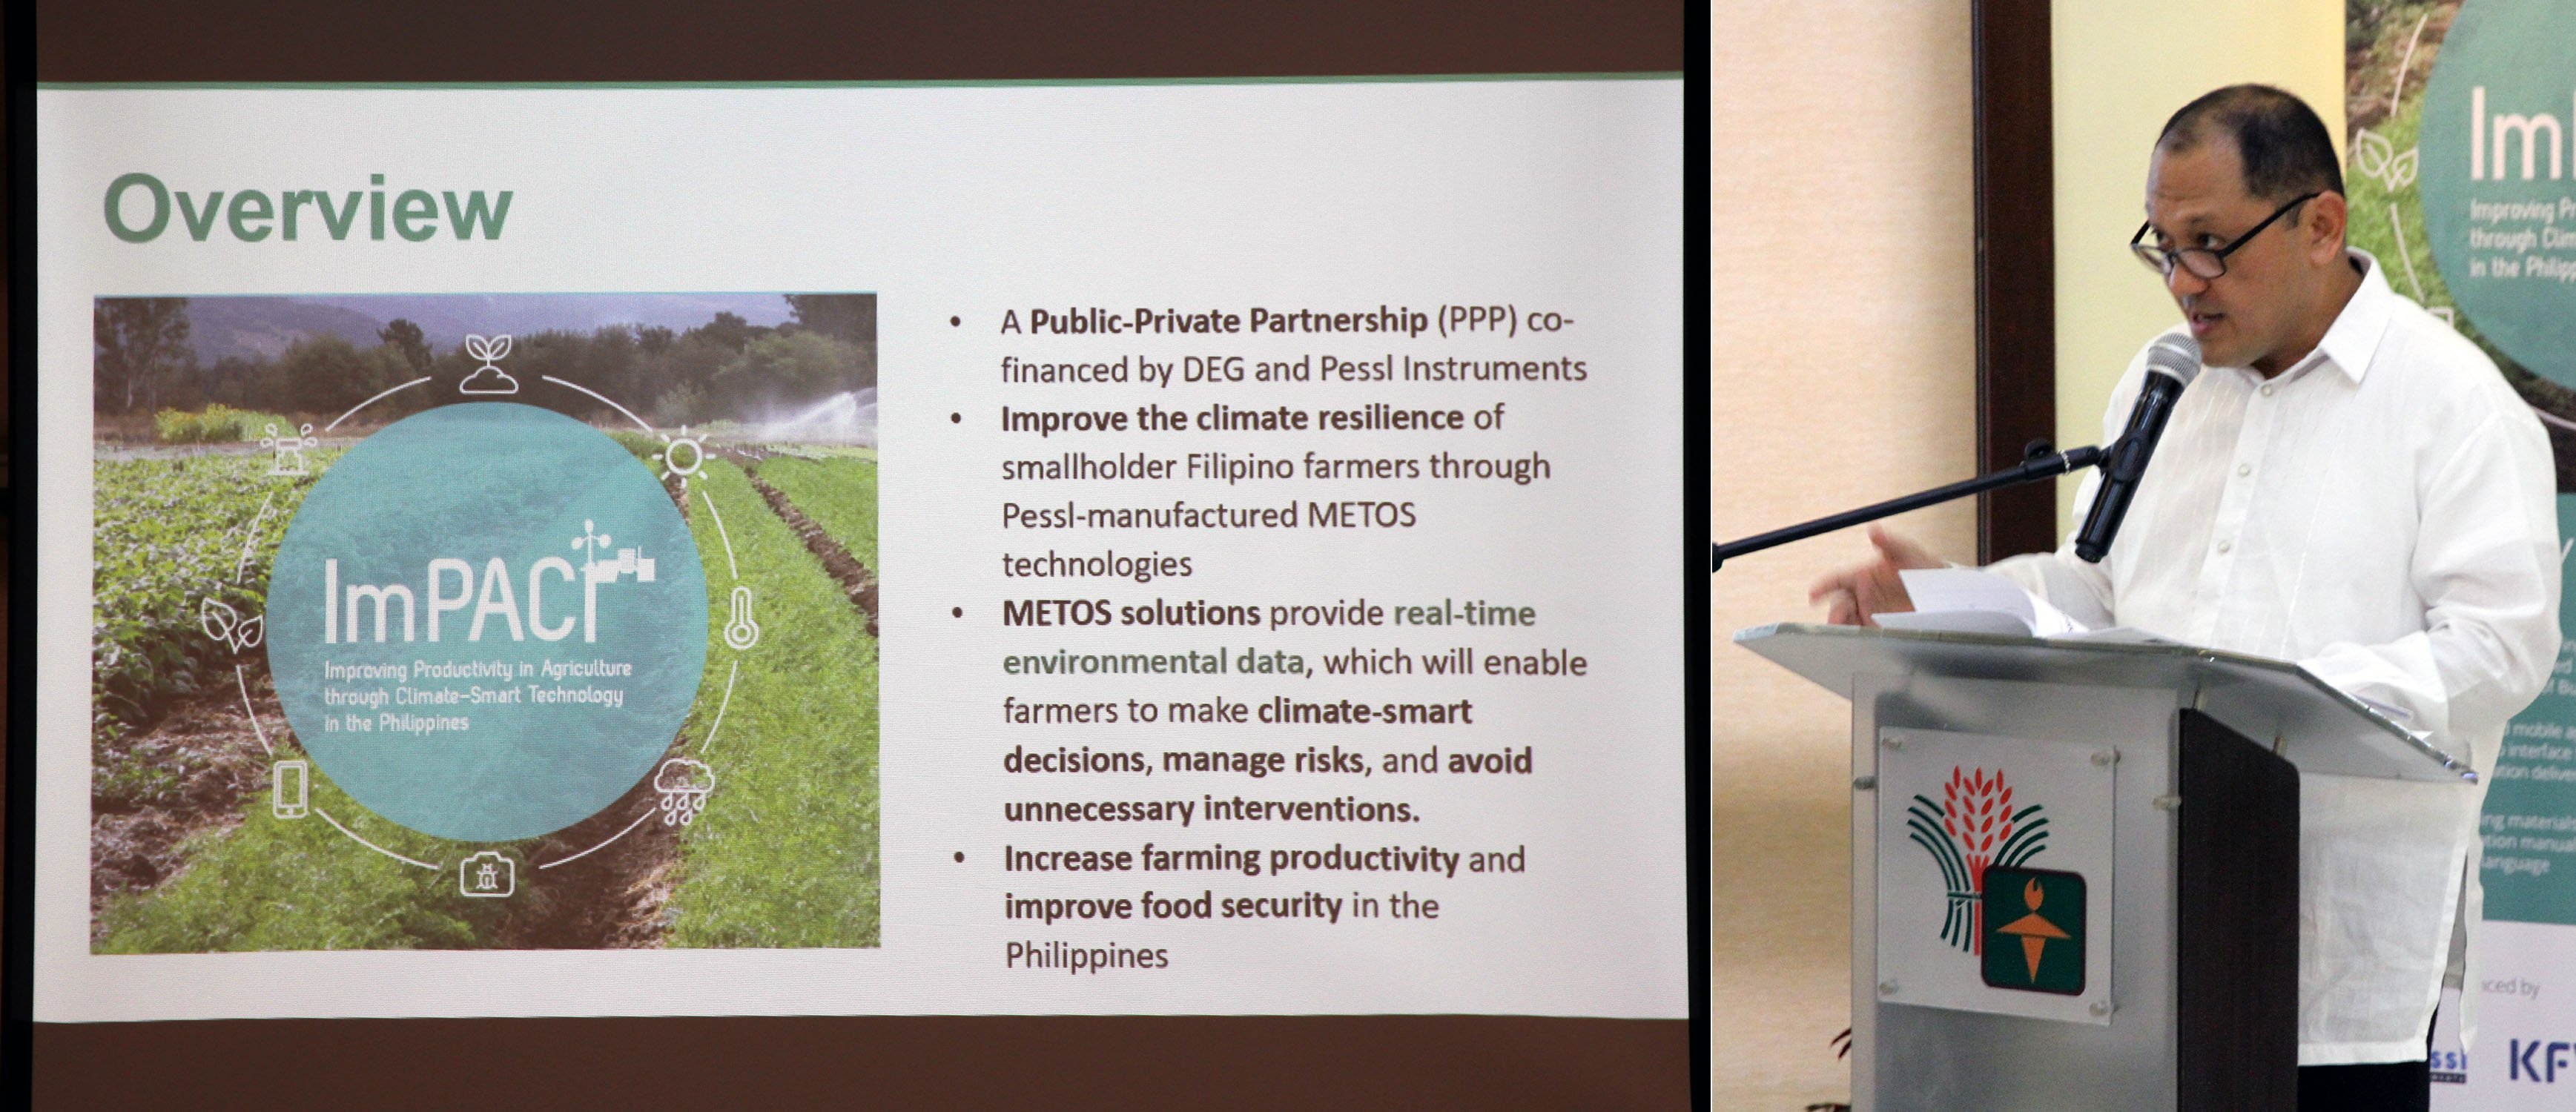 CLIMATE-SMART TECHNOLOGY IN AGRICULTURE